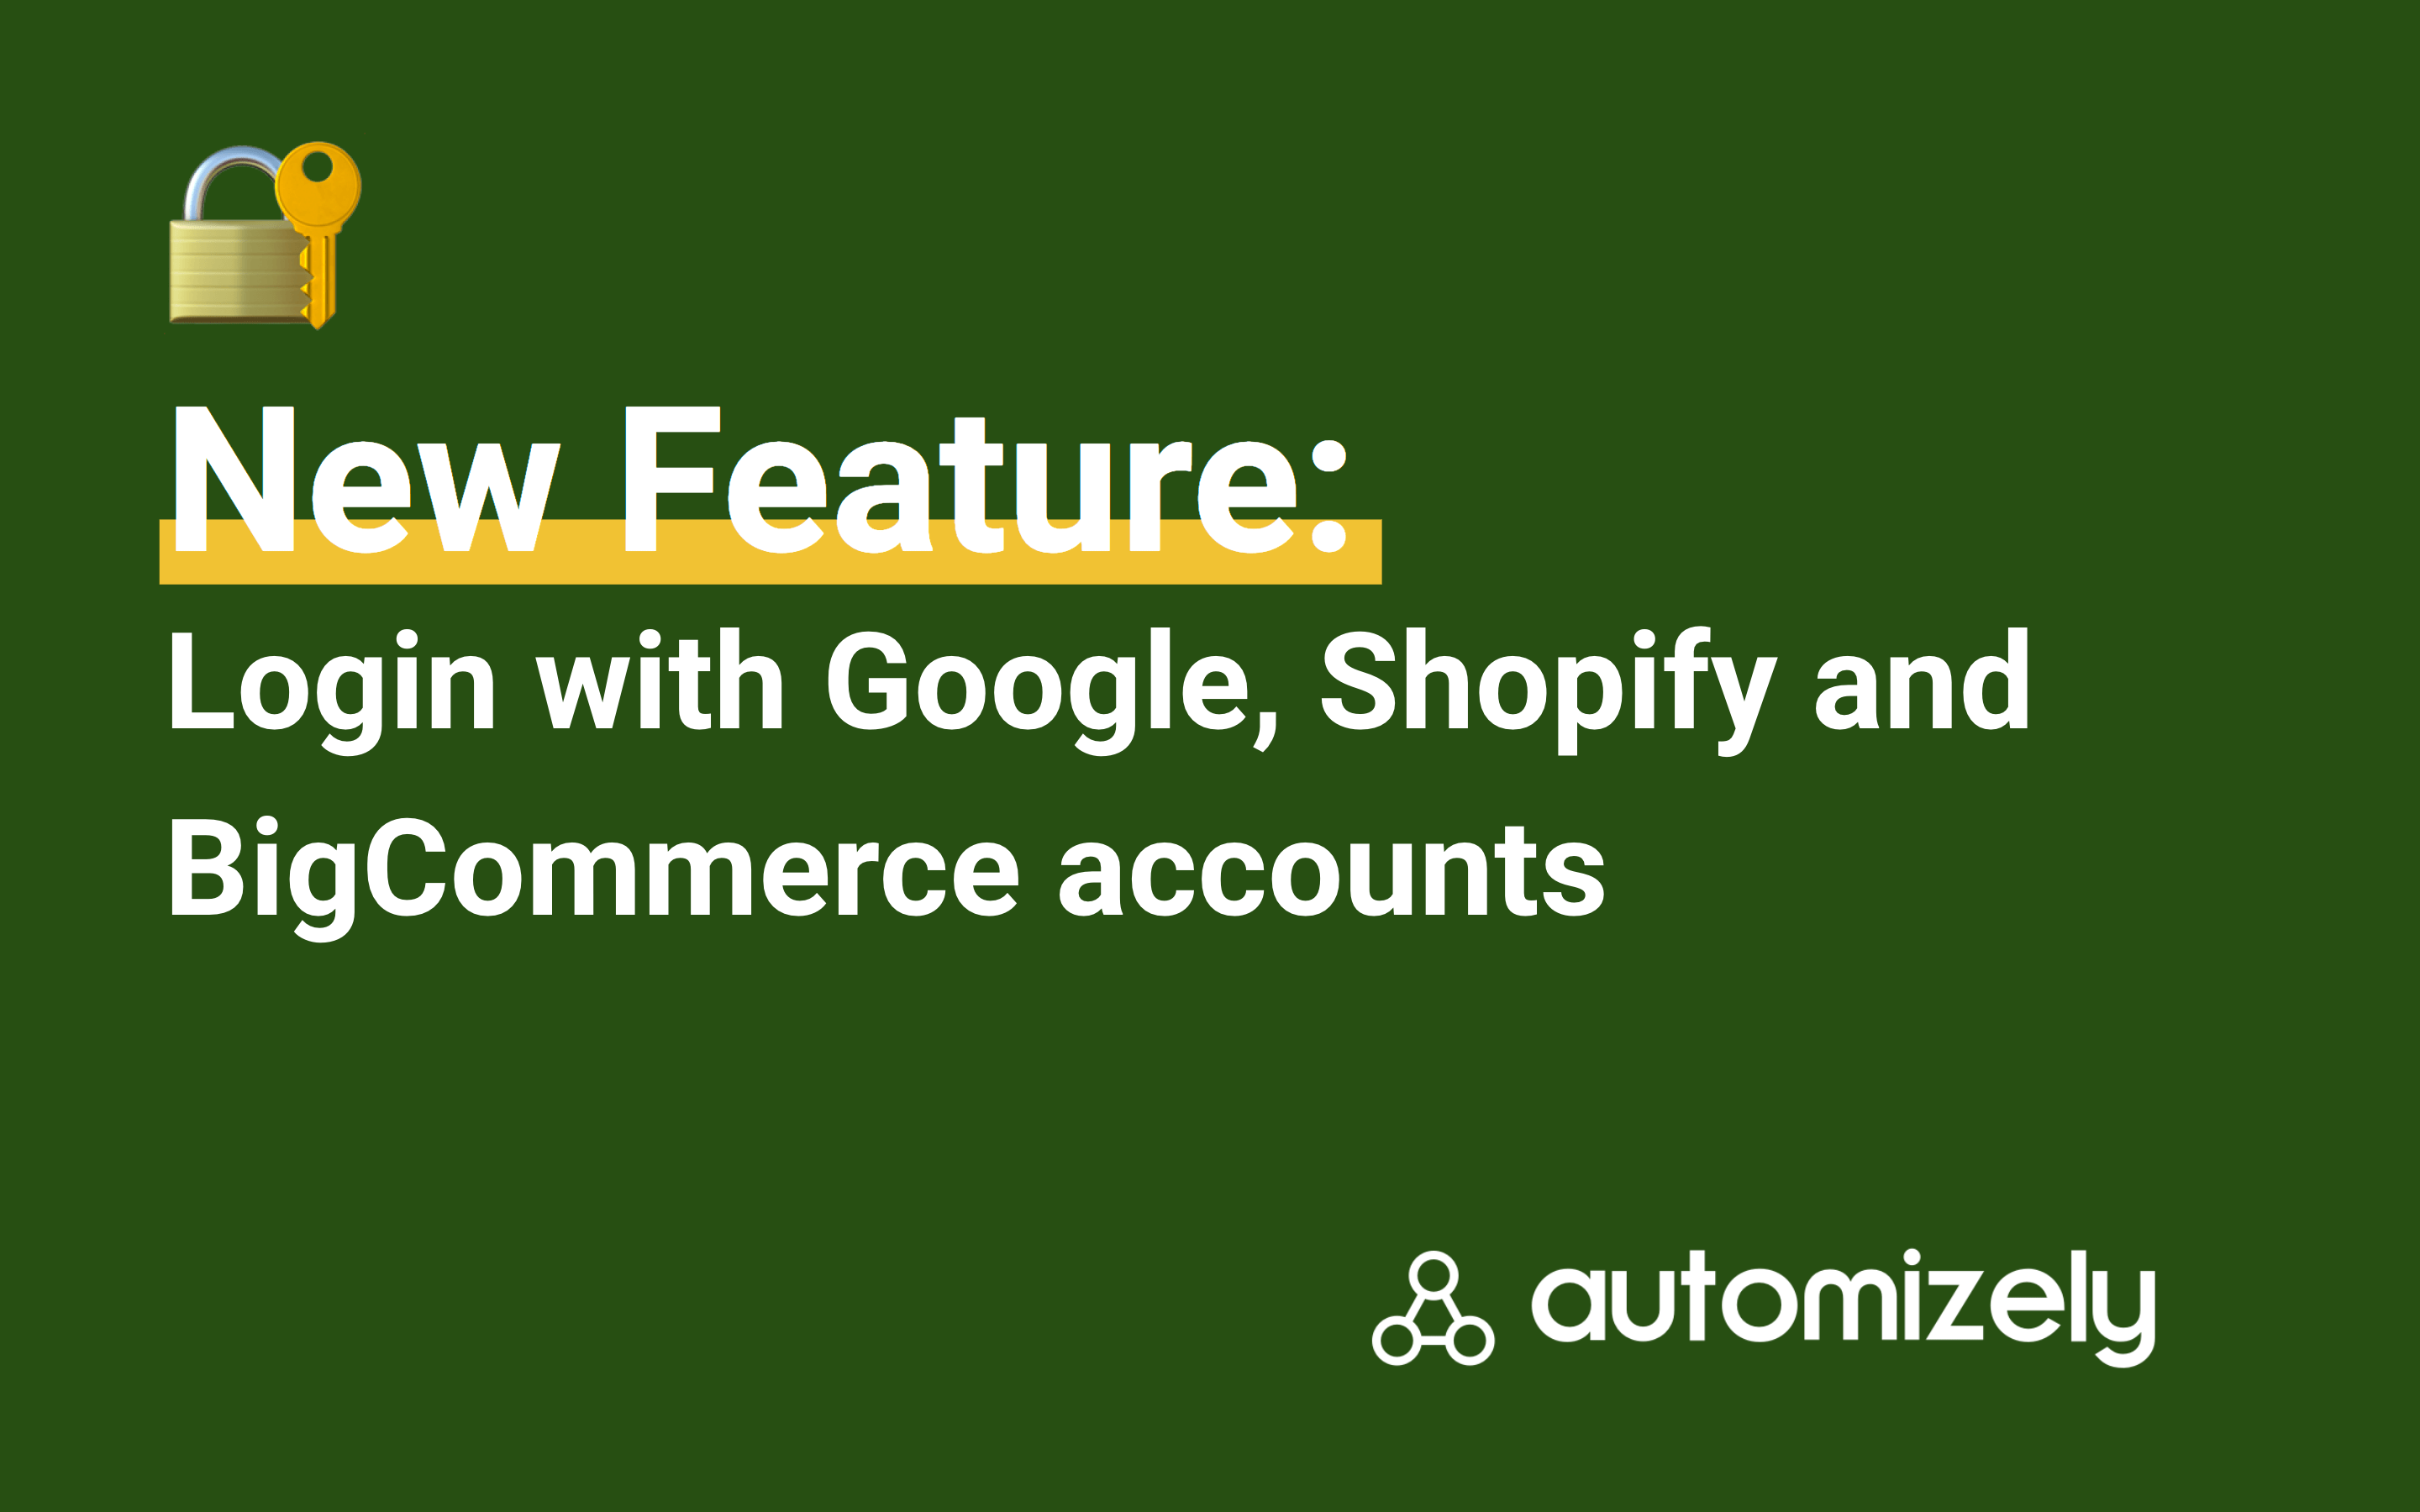 Login with Google, Shopify and BigCommerce accounts